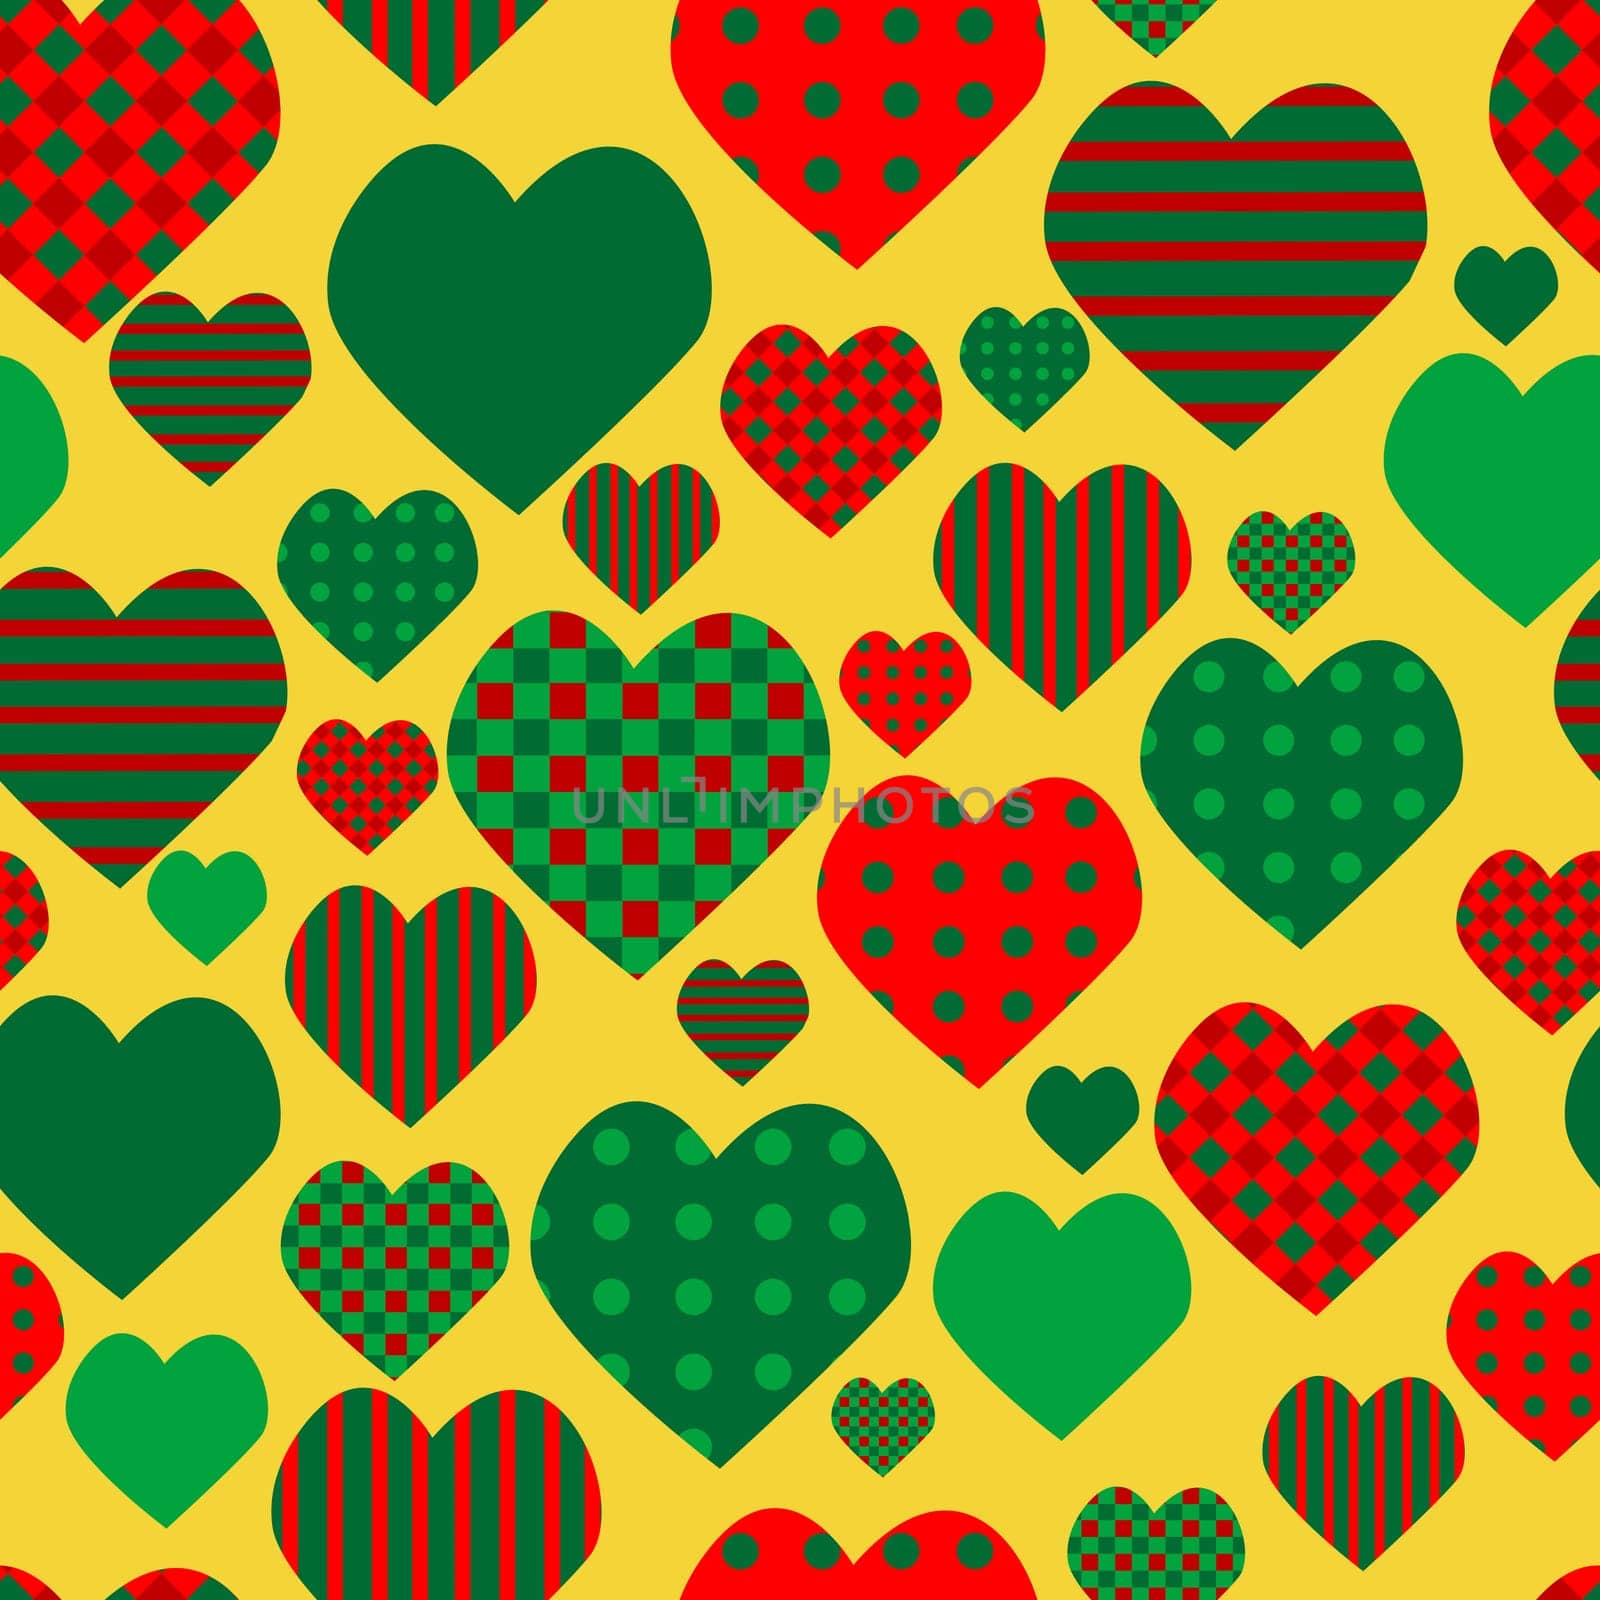 Hearts with different prints in the colors of Christmas wrapping paper by hibrida13